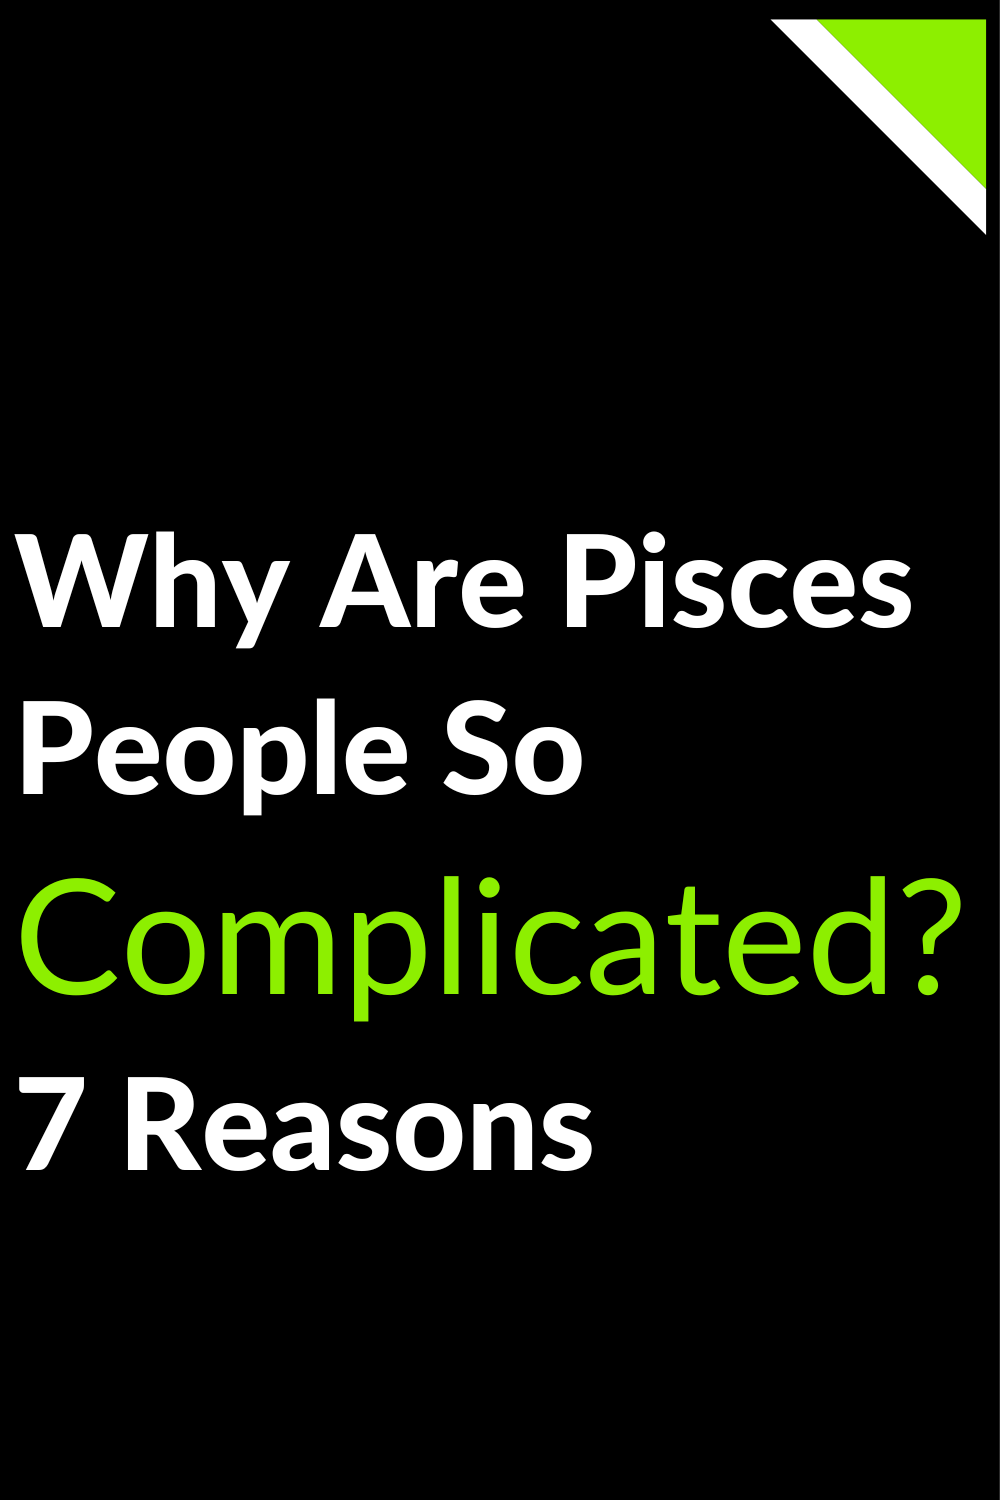 Why Are Pisces People So Complicated? 7 Reasons